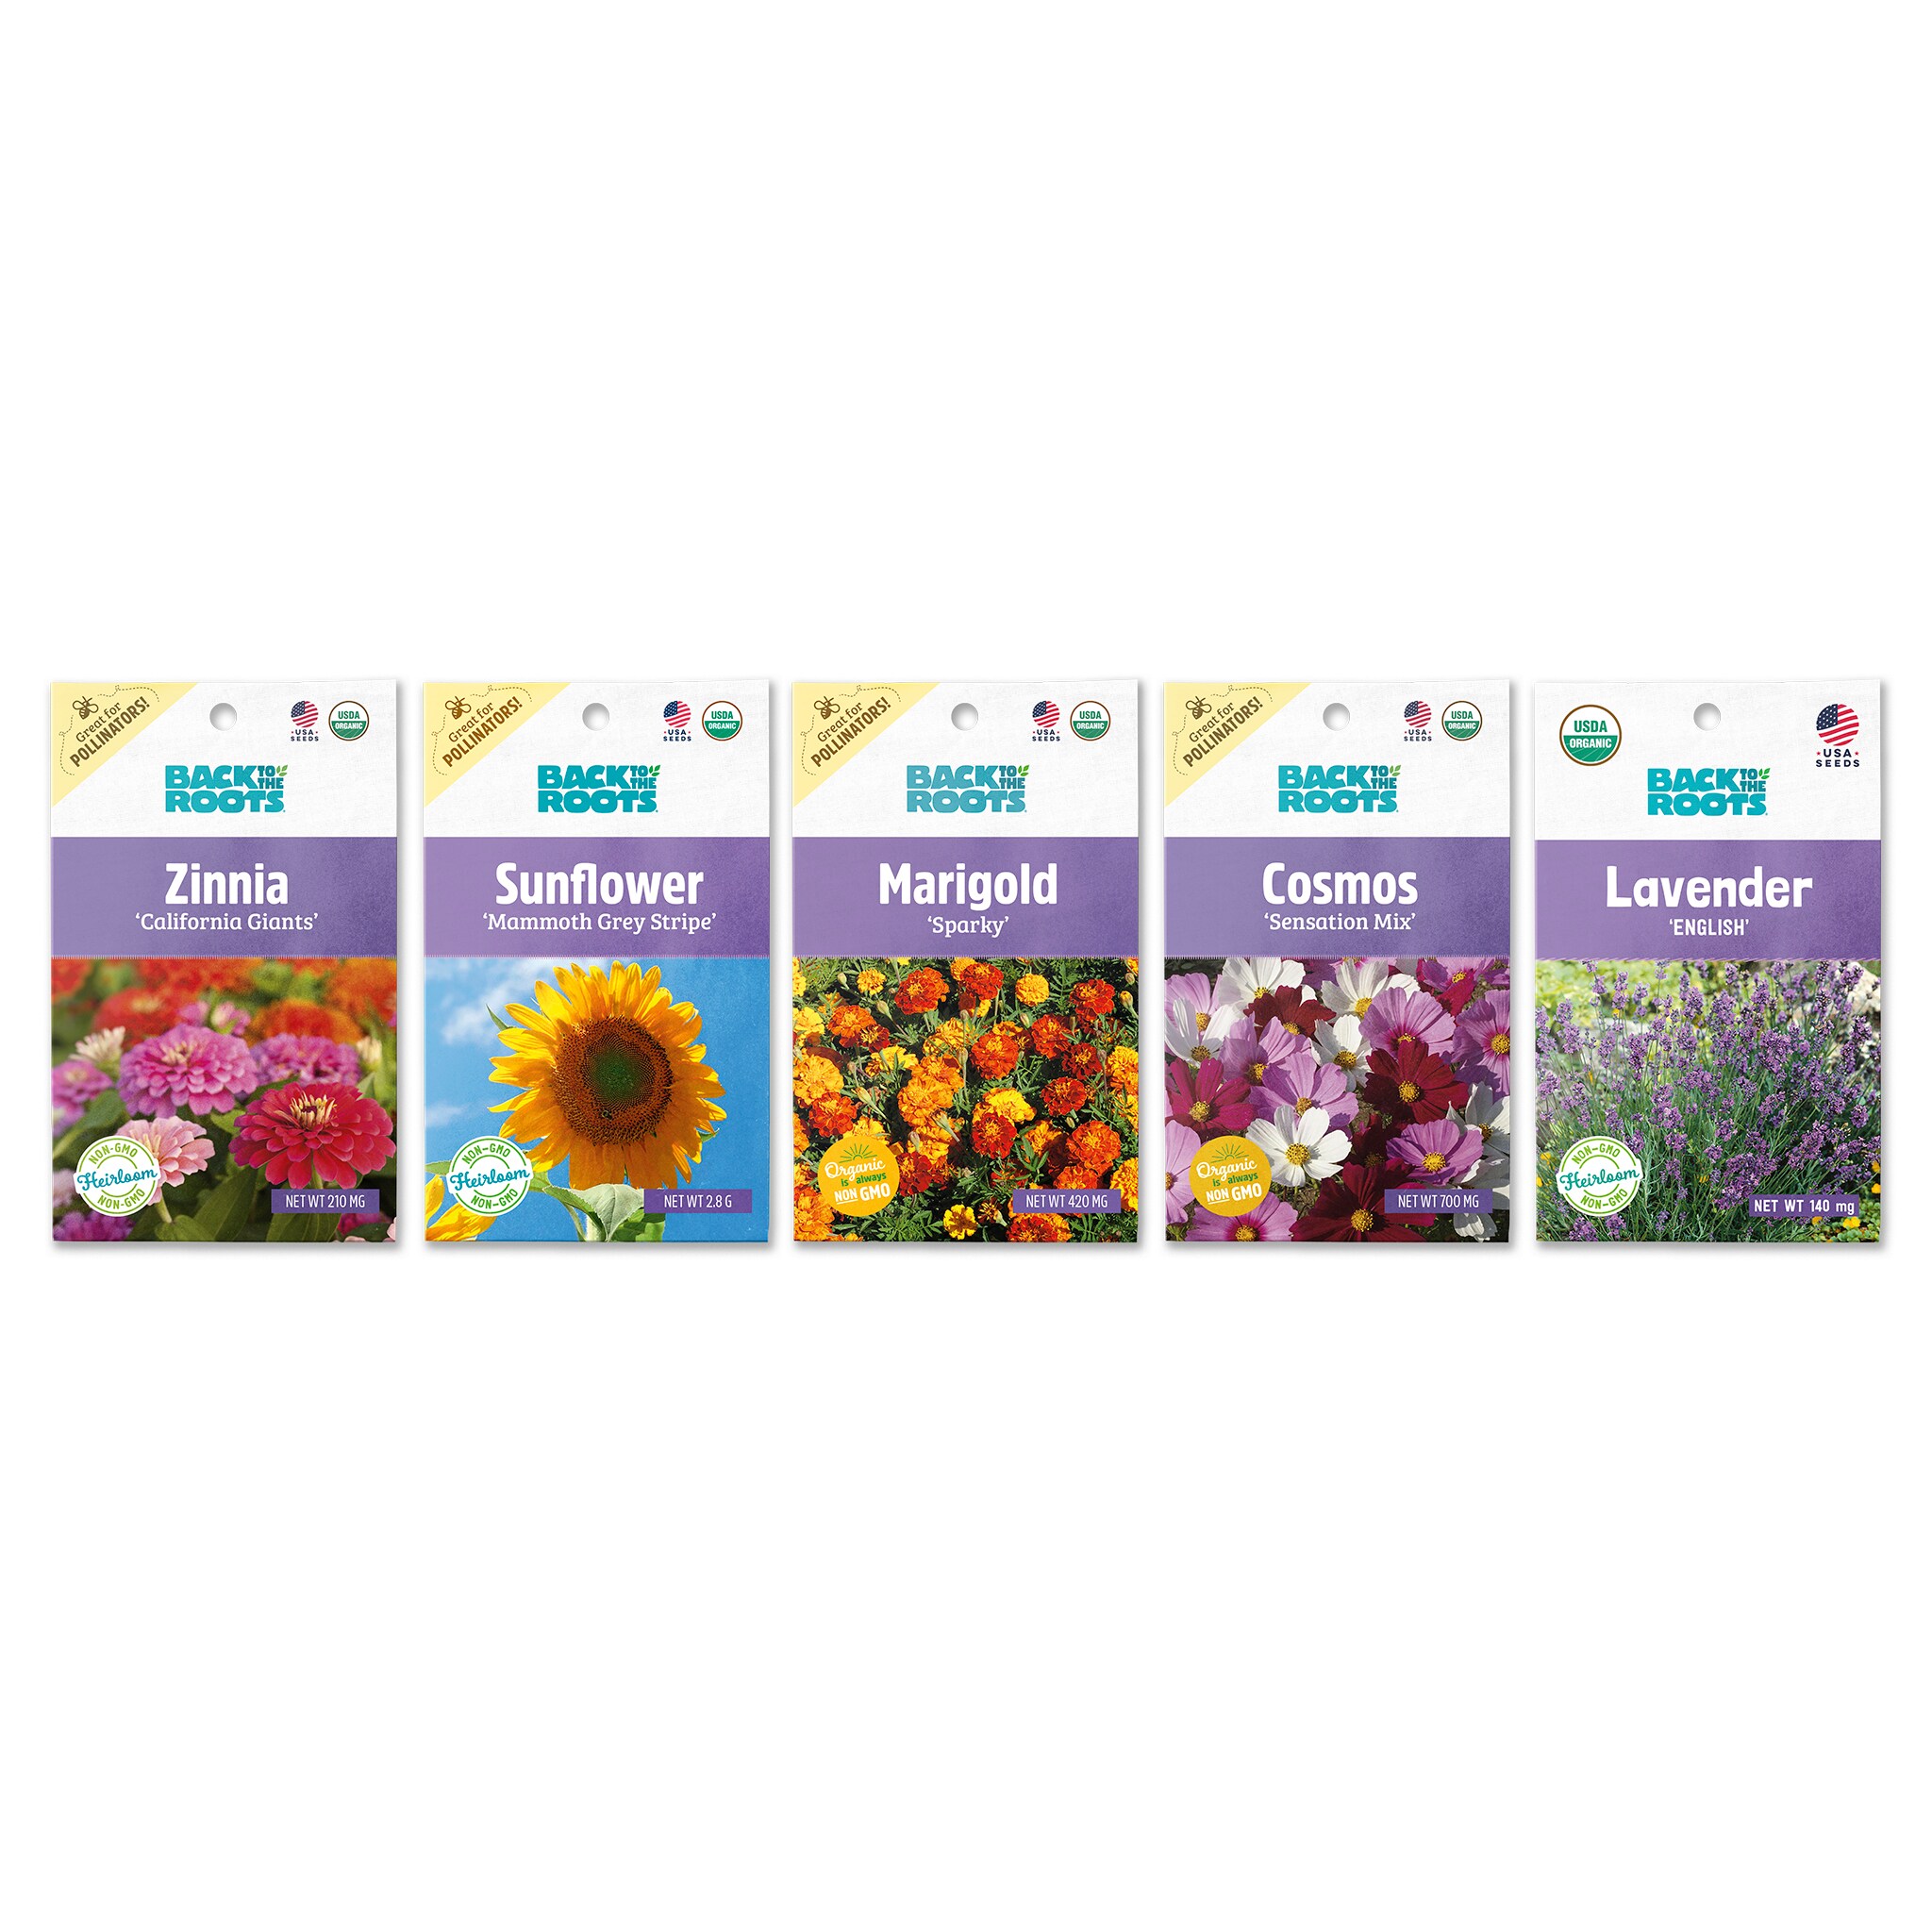 Back to the Roots Organic 20 oz Organic Flowers Seeds Variety 20 pack  Seeds